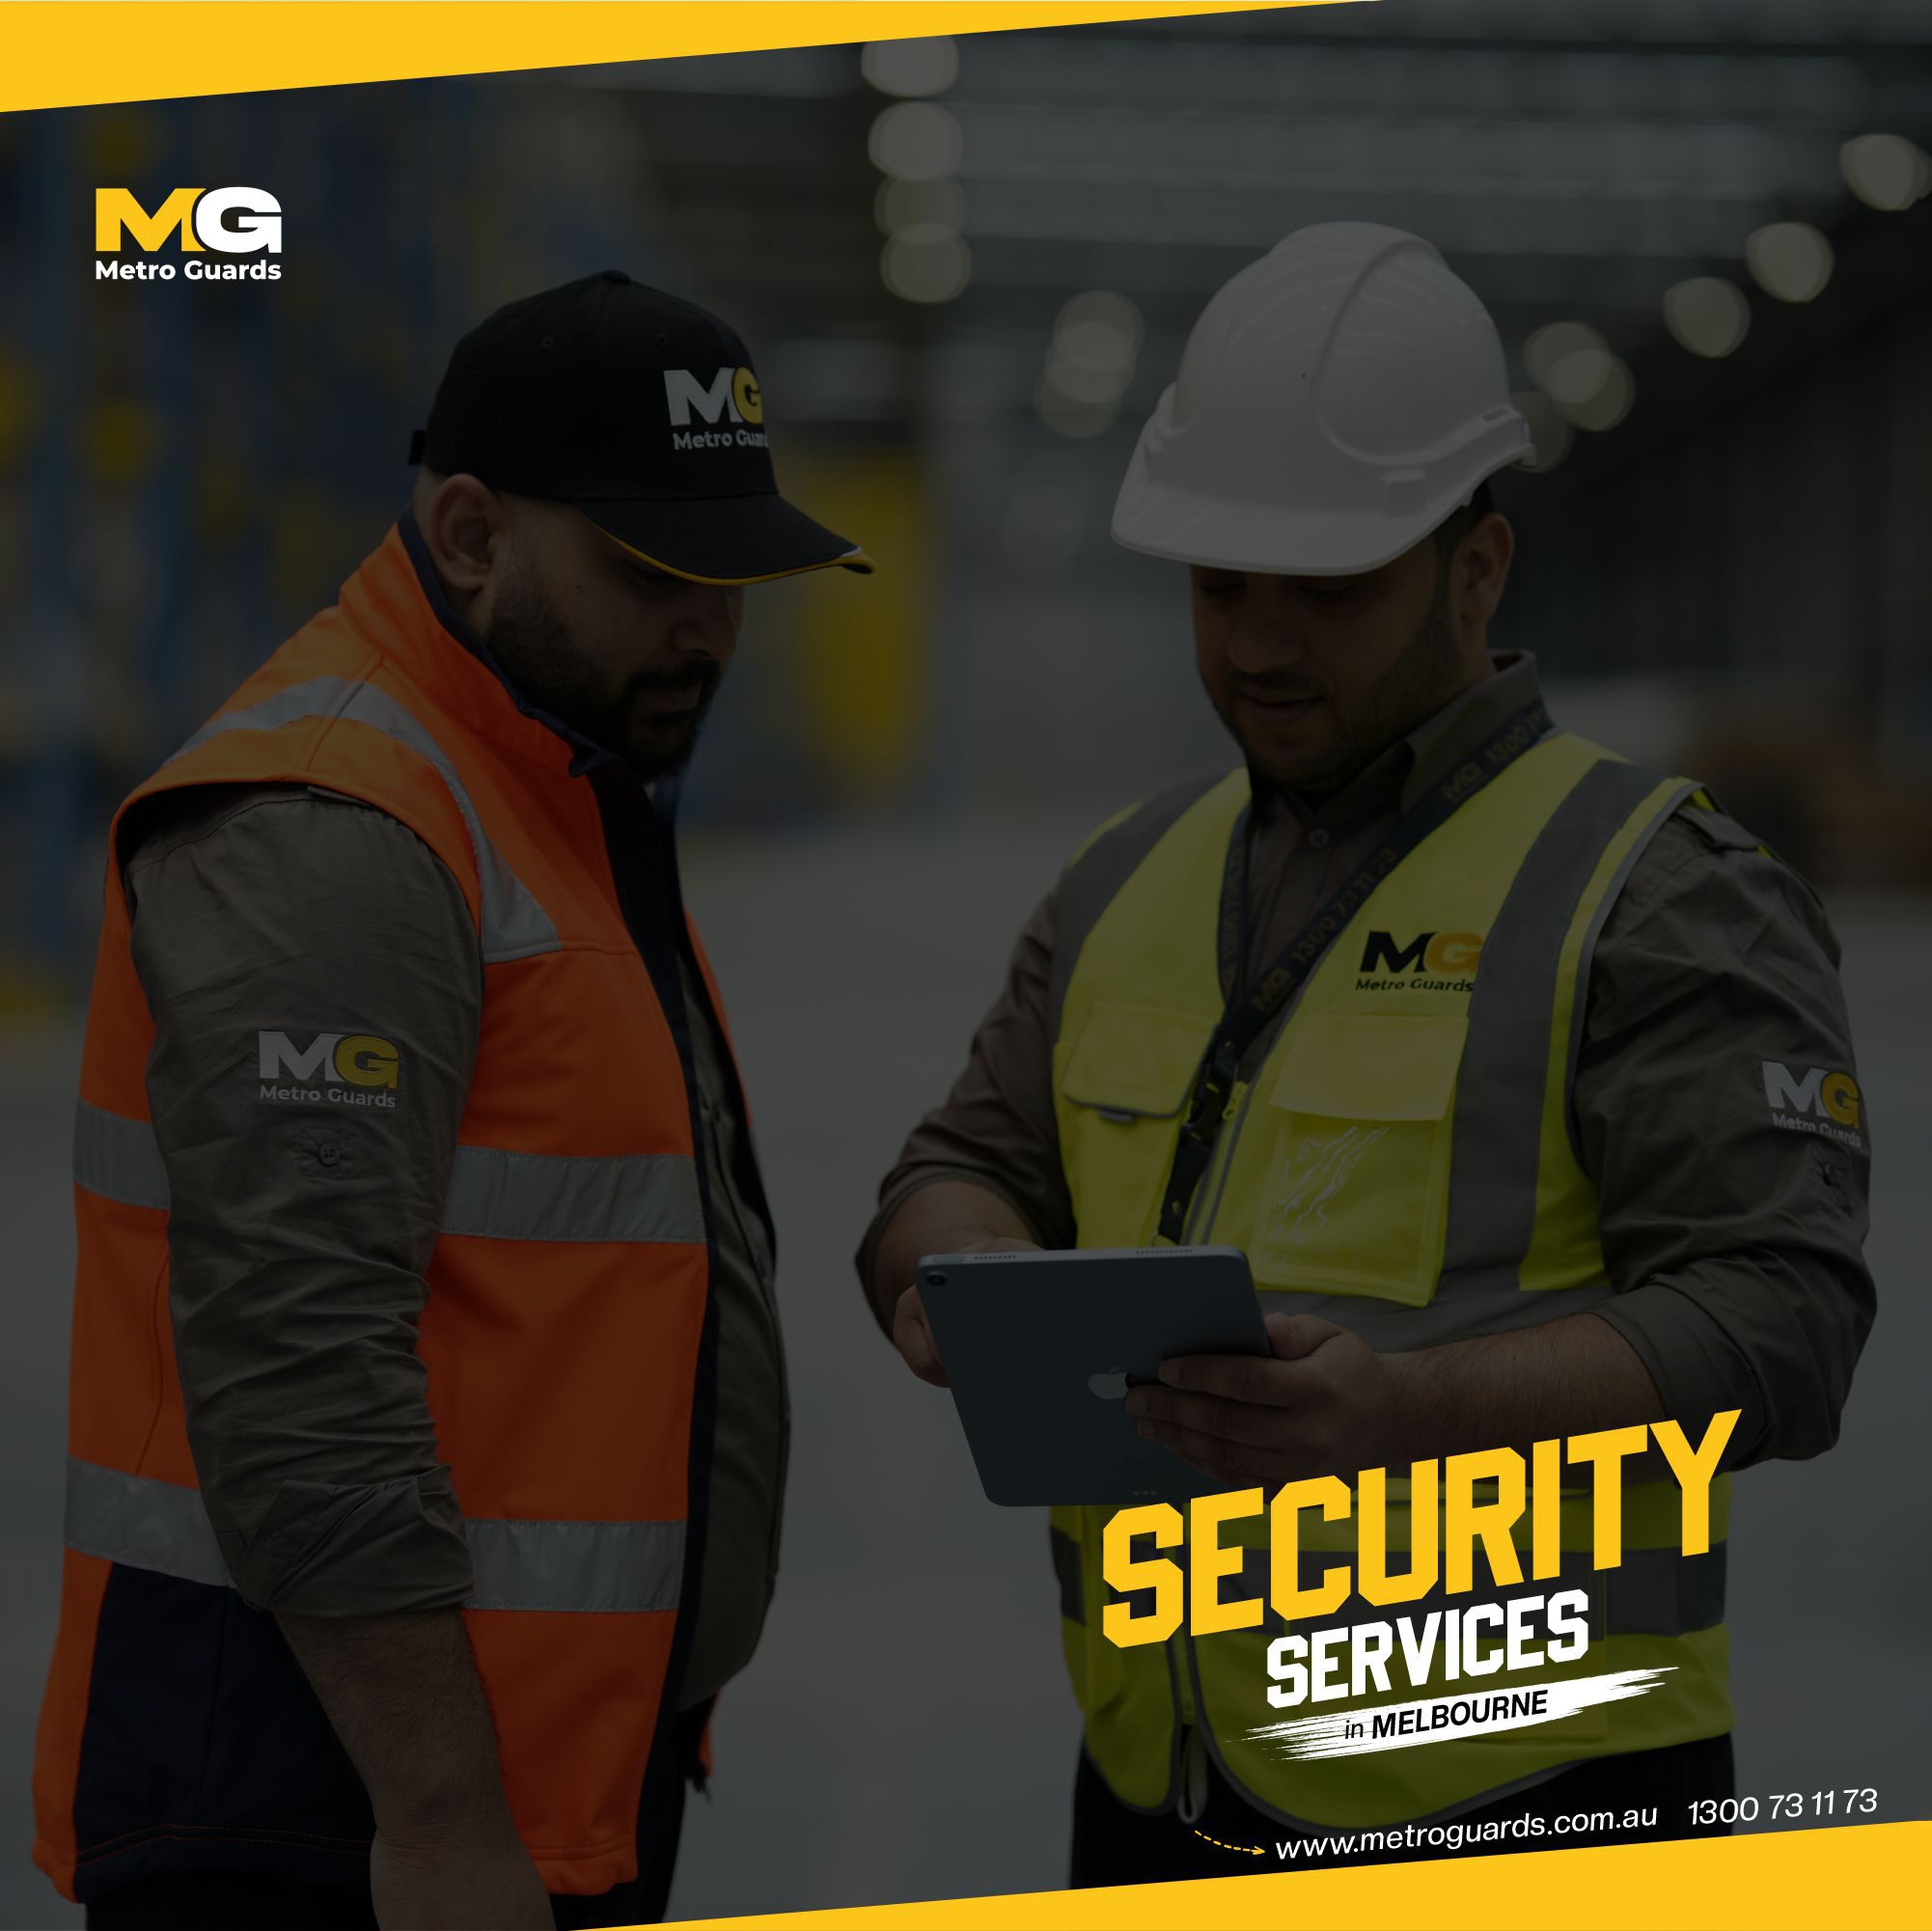 Metropolitan Guards: A name to thrive your business